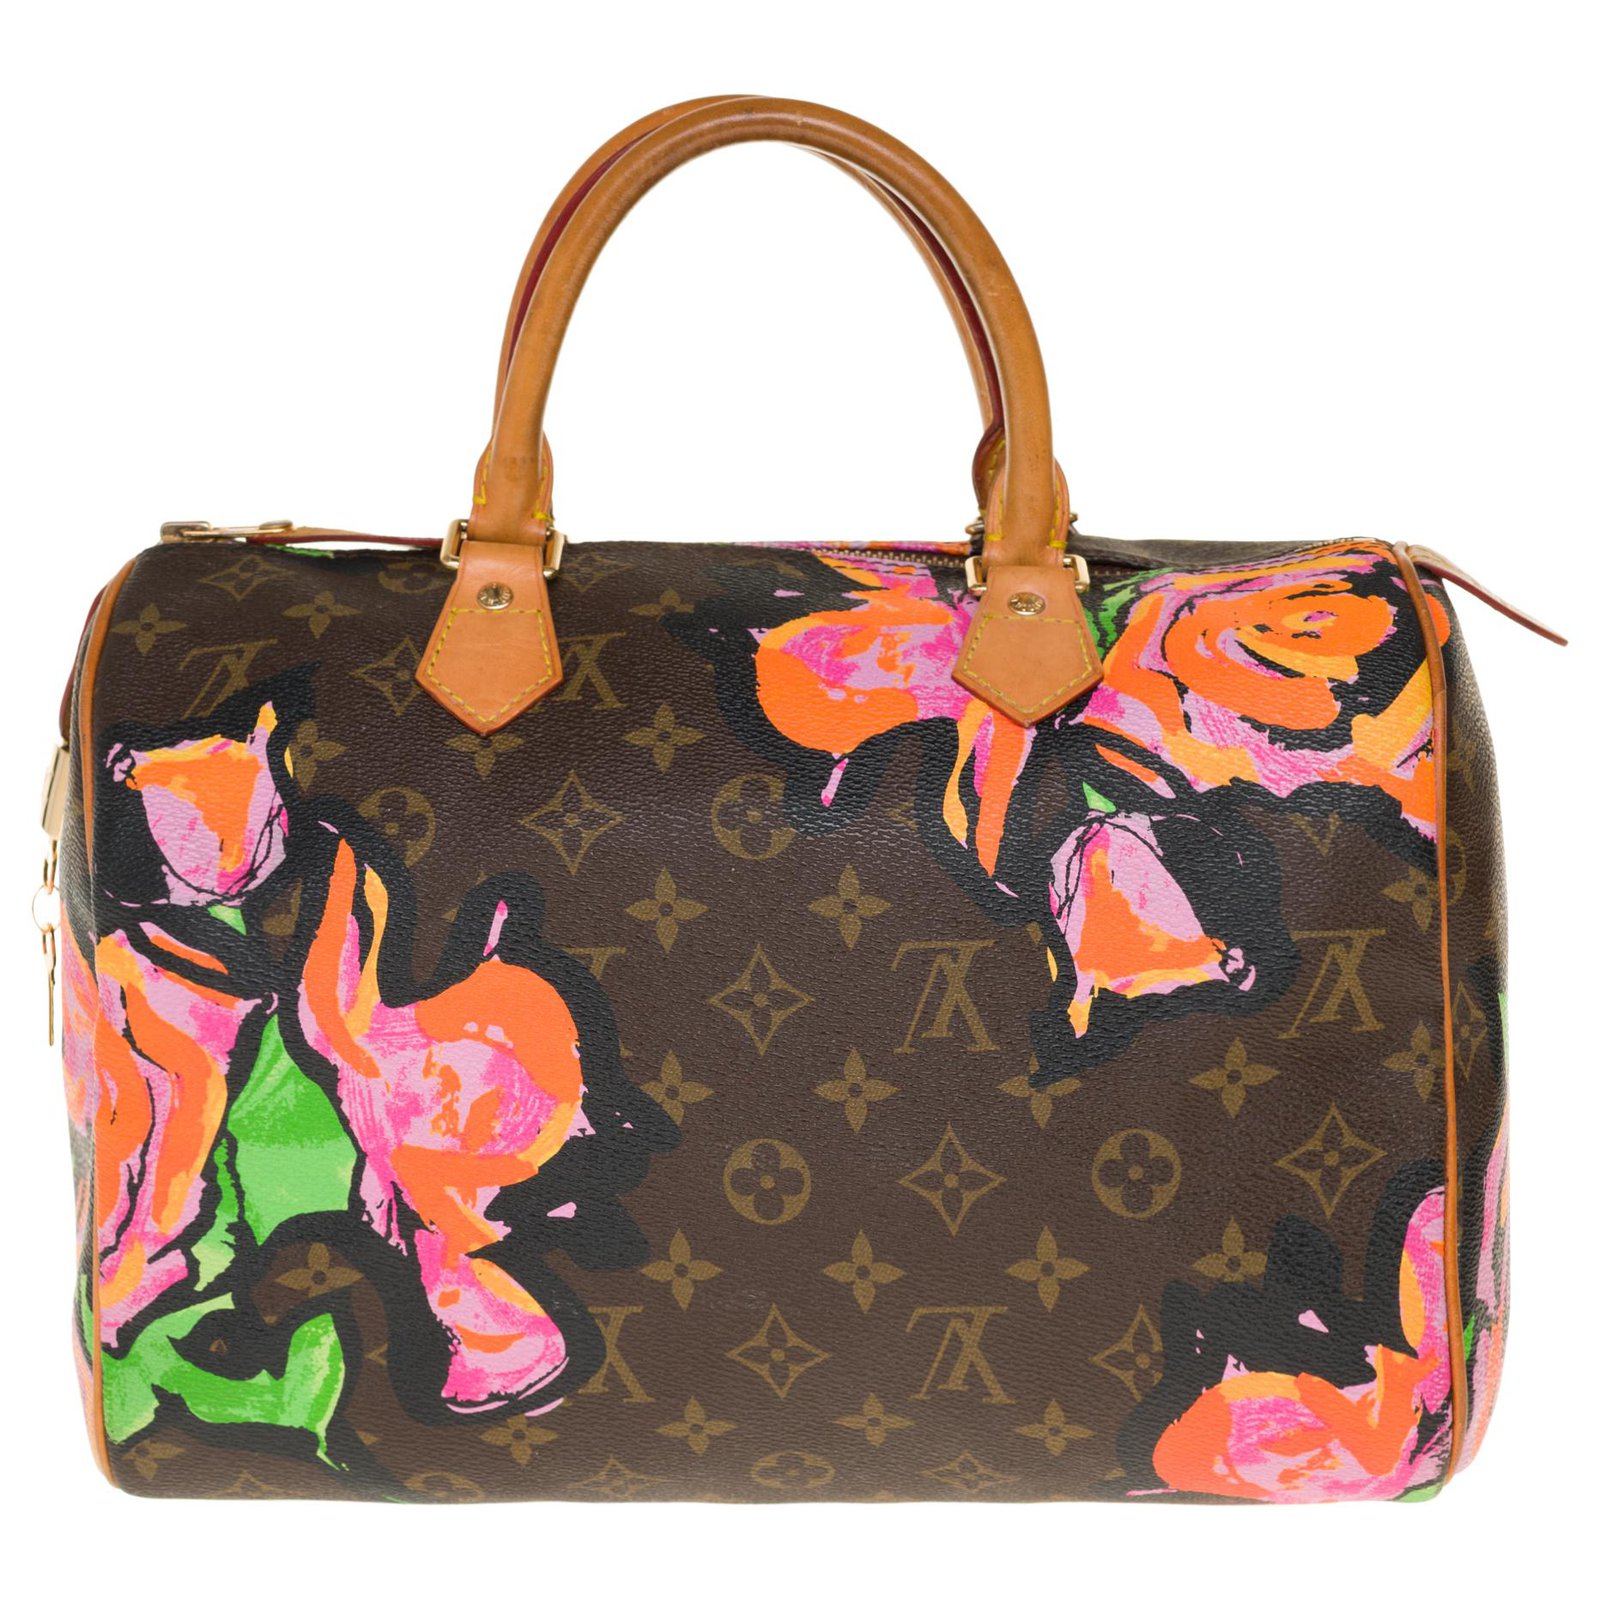 LOUIS VUITTON STEPHEN SPROUSE MONOGRAM ROSES SPEEDY 30 LIMITED